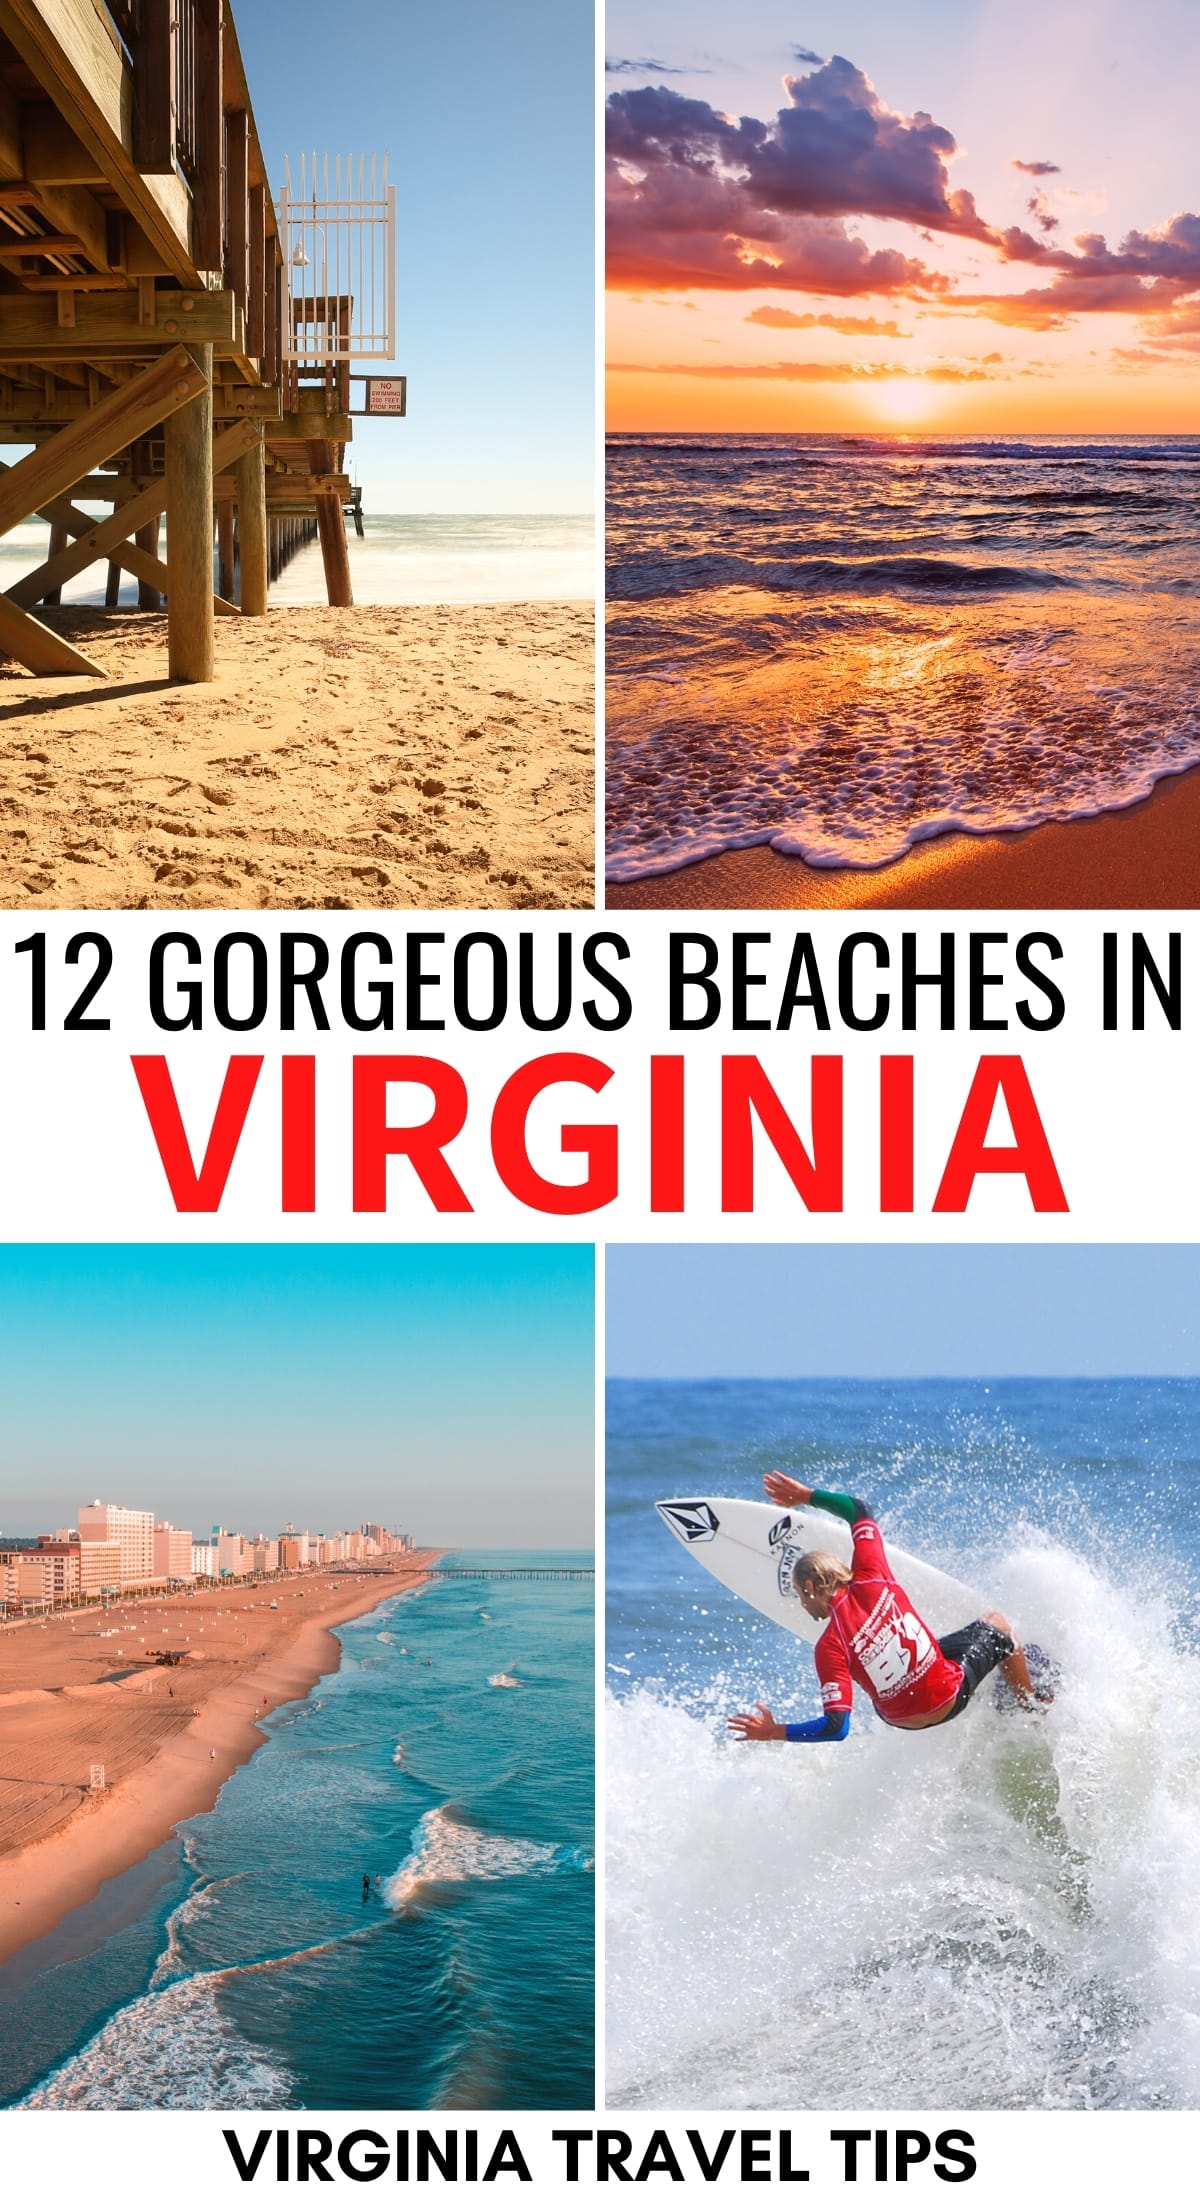 Are you on the hunt for the best beaches in Virginia? This guide details the top beaches in Virginia, including sandy beaches on the Chesapeake Bay and more! | Things to do in Virginia | Beaches in VA | Virginia Beach | Sandbridge | Colonial Beach | First Landing State Park | False Cape State Park | Croatan | Virginia surfing | Things to do in Virginia Beach